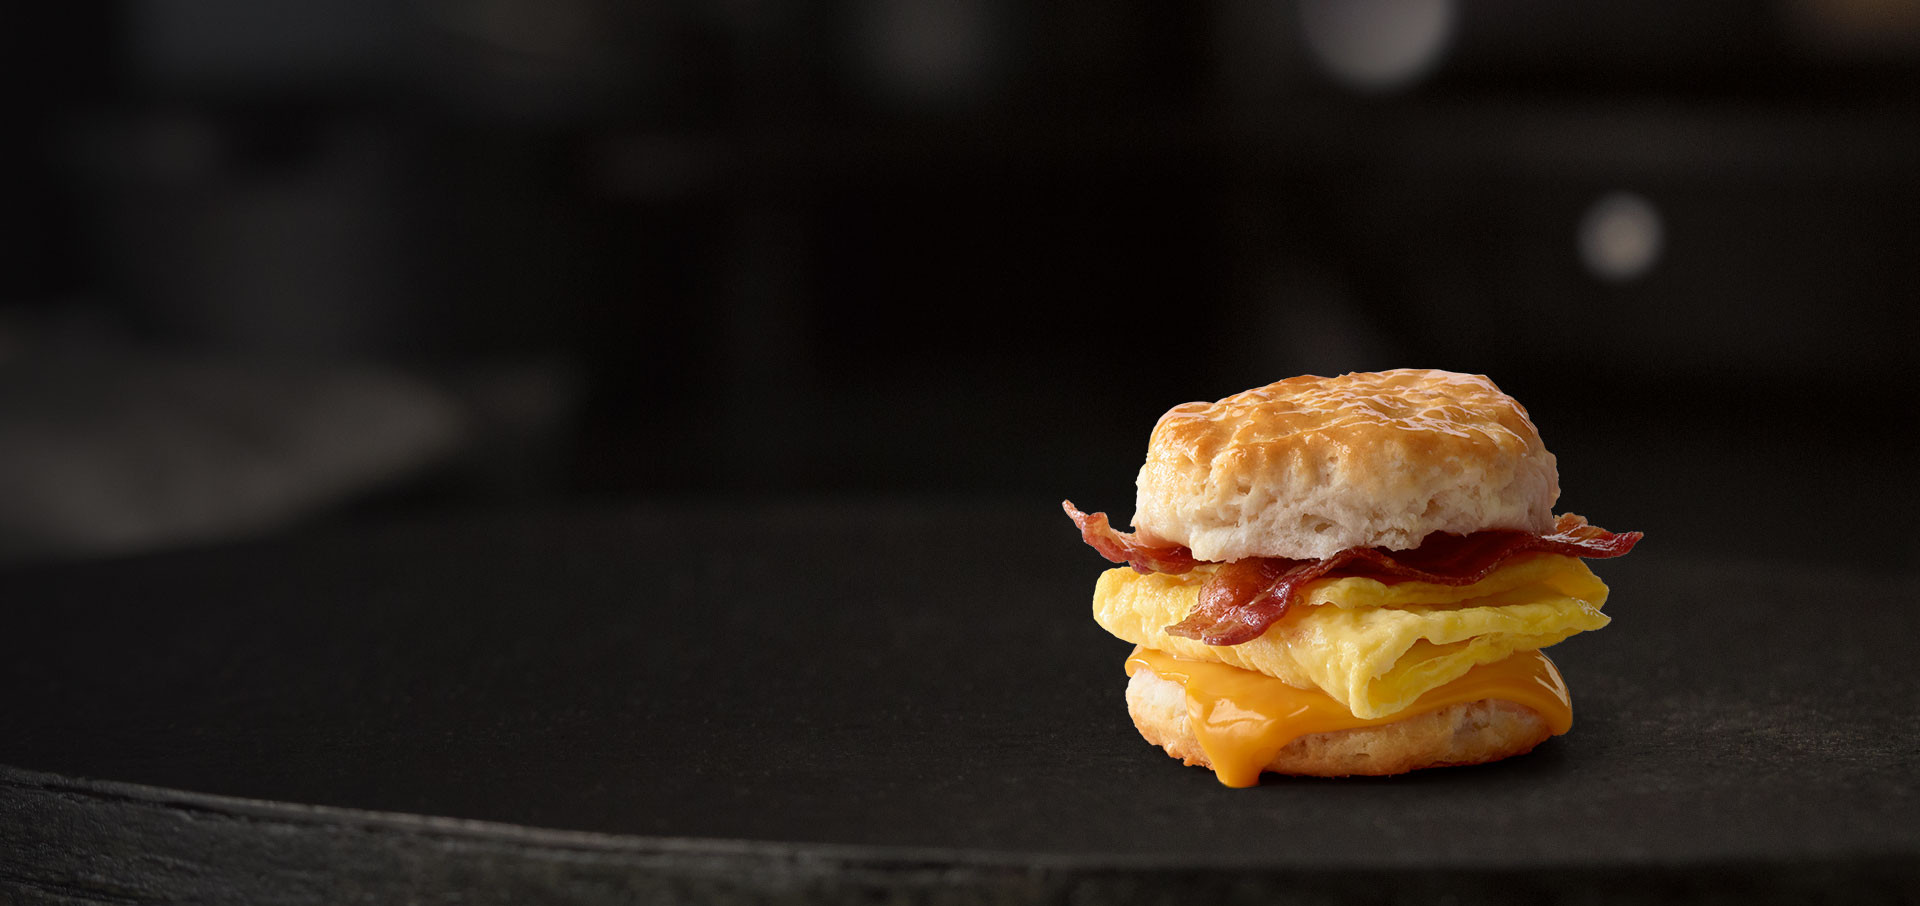 Bacon Egg Cheese Biscuit Mcdonalds Calories
 Mcdonald S Sausage Egg And Cheese Biscuit Recipe